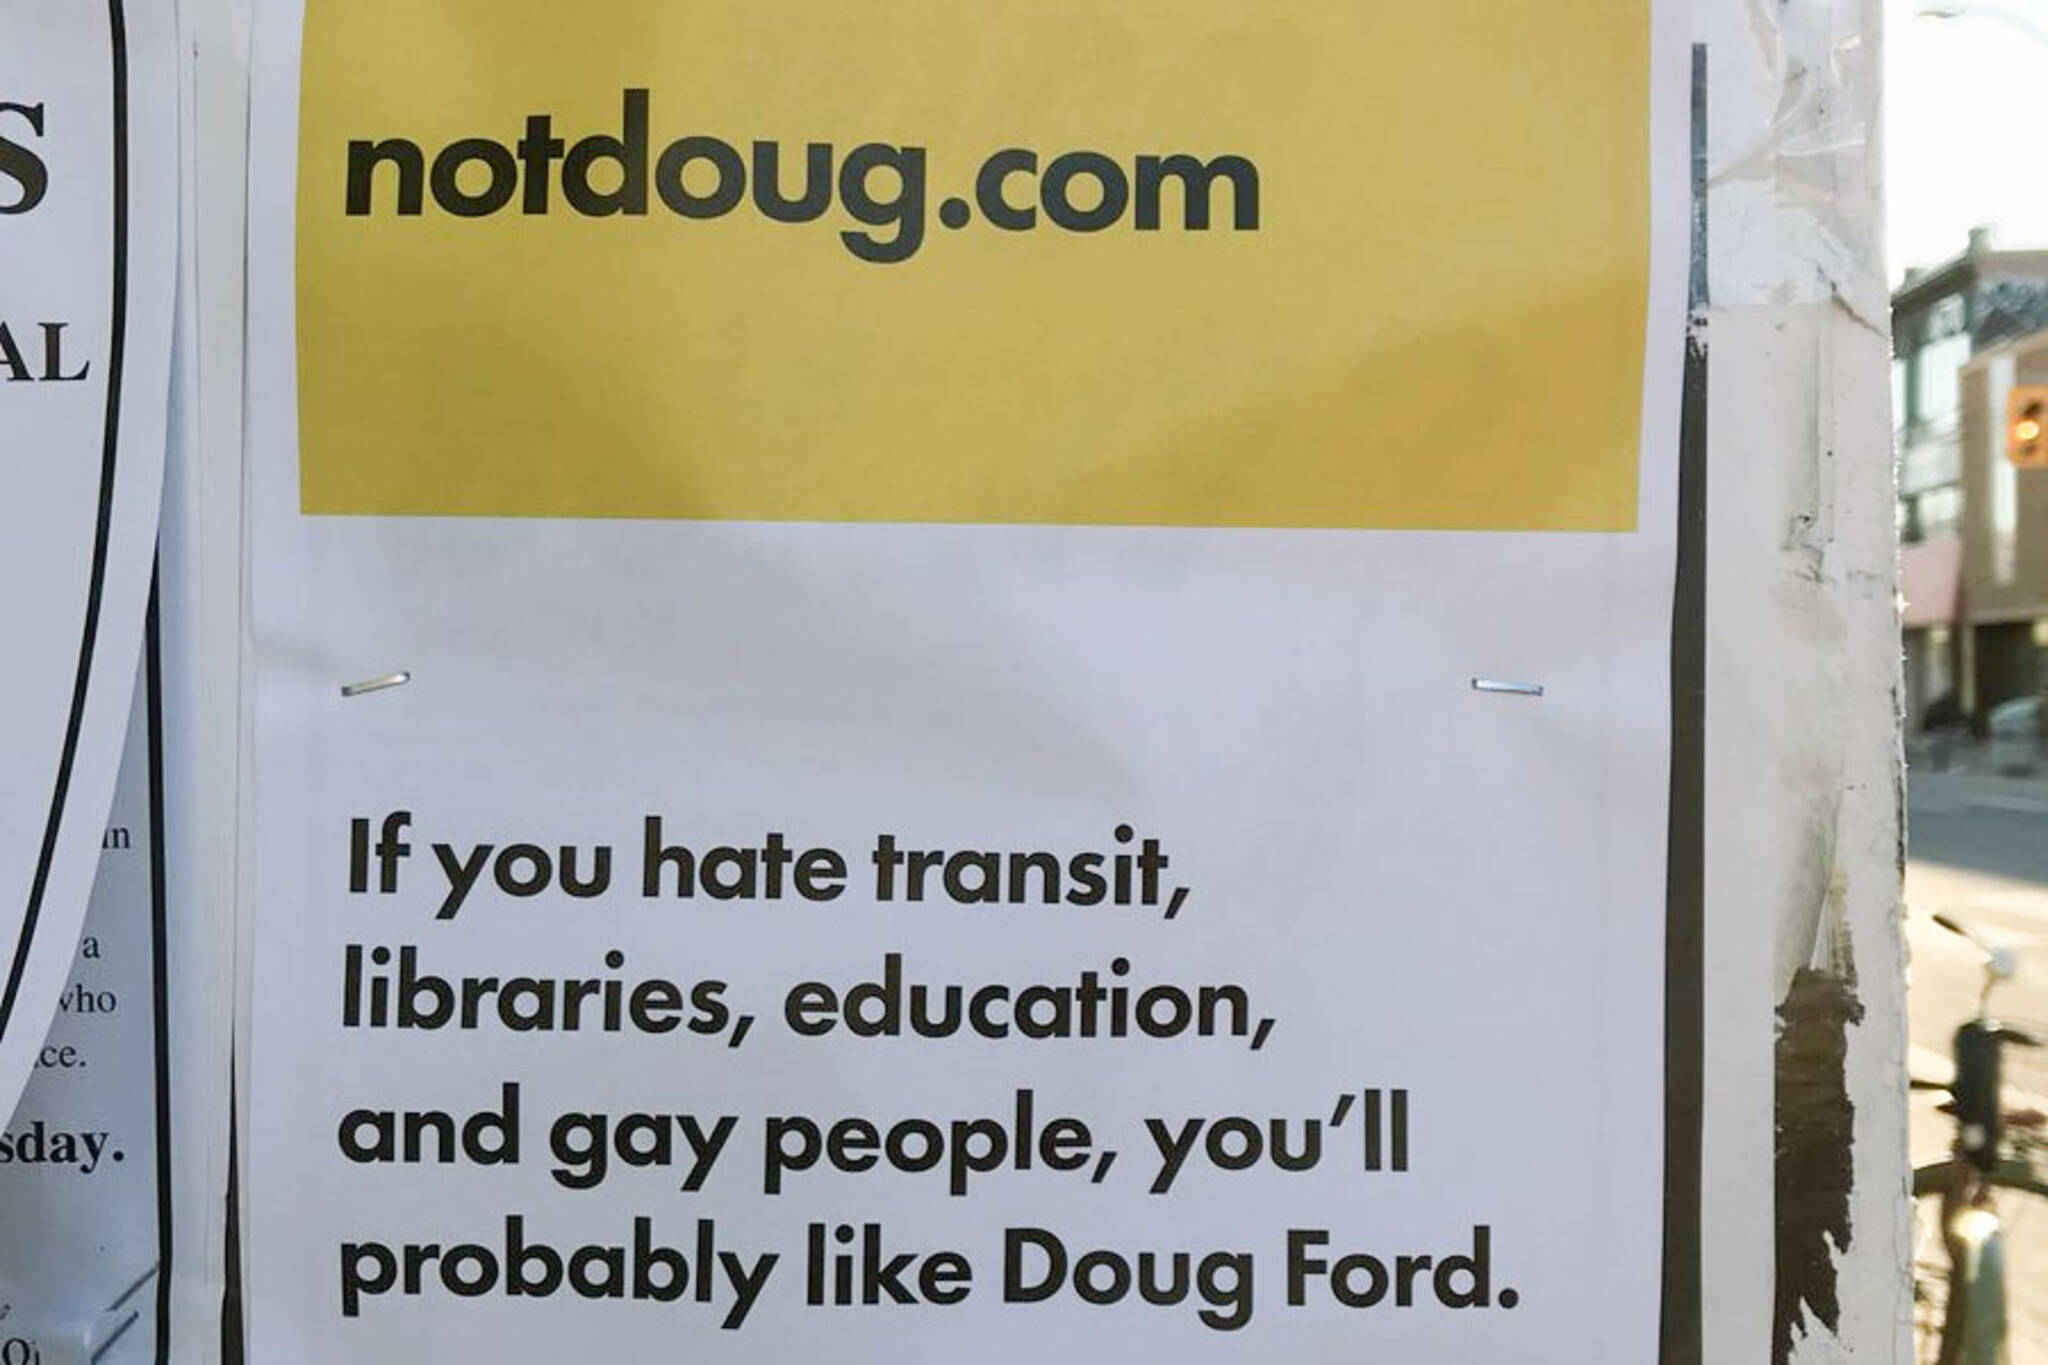 Not Doug Ford